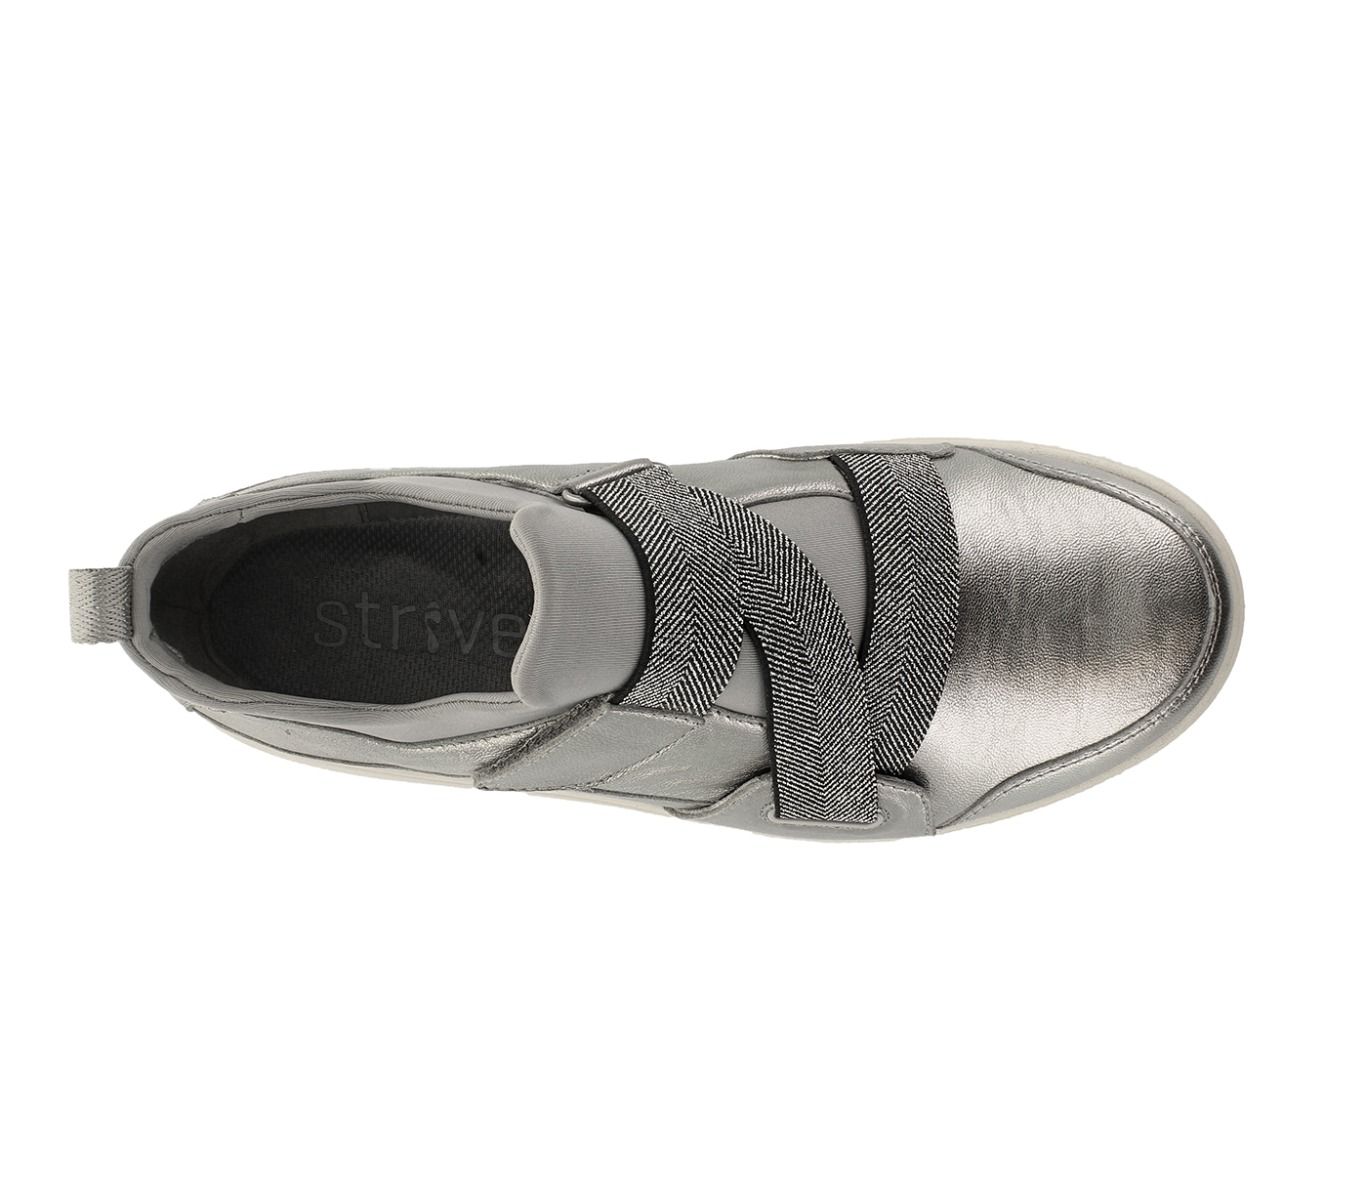 Strive Women's Georgia Leather Active Sneakers Silver